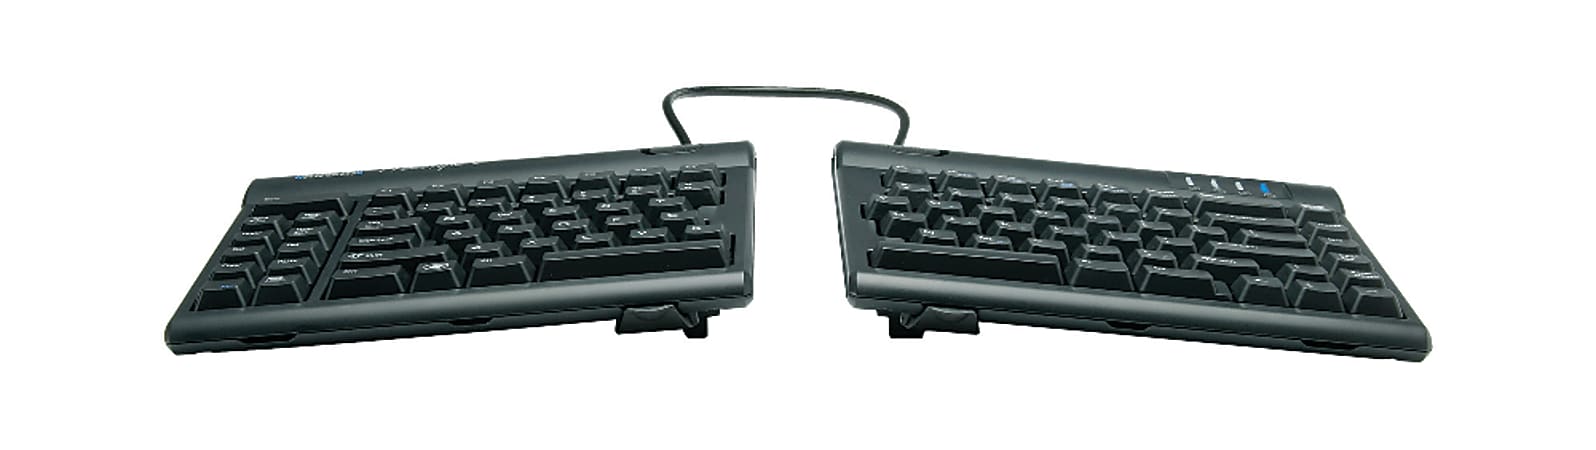 Kinesis Freestyle2 Keyboard for PC